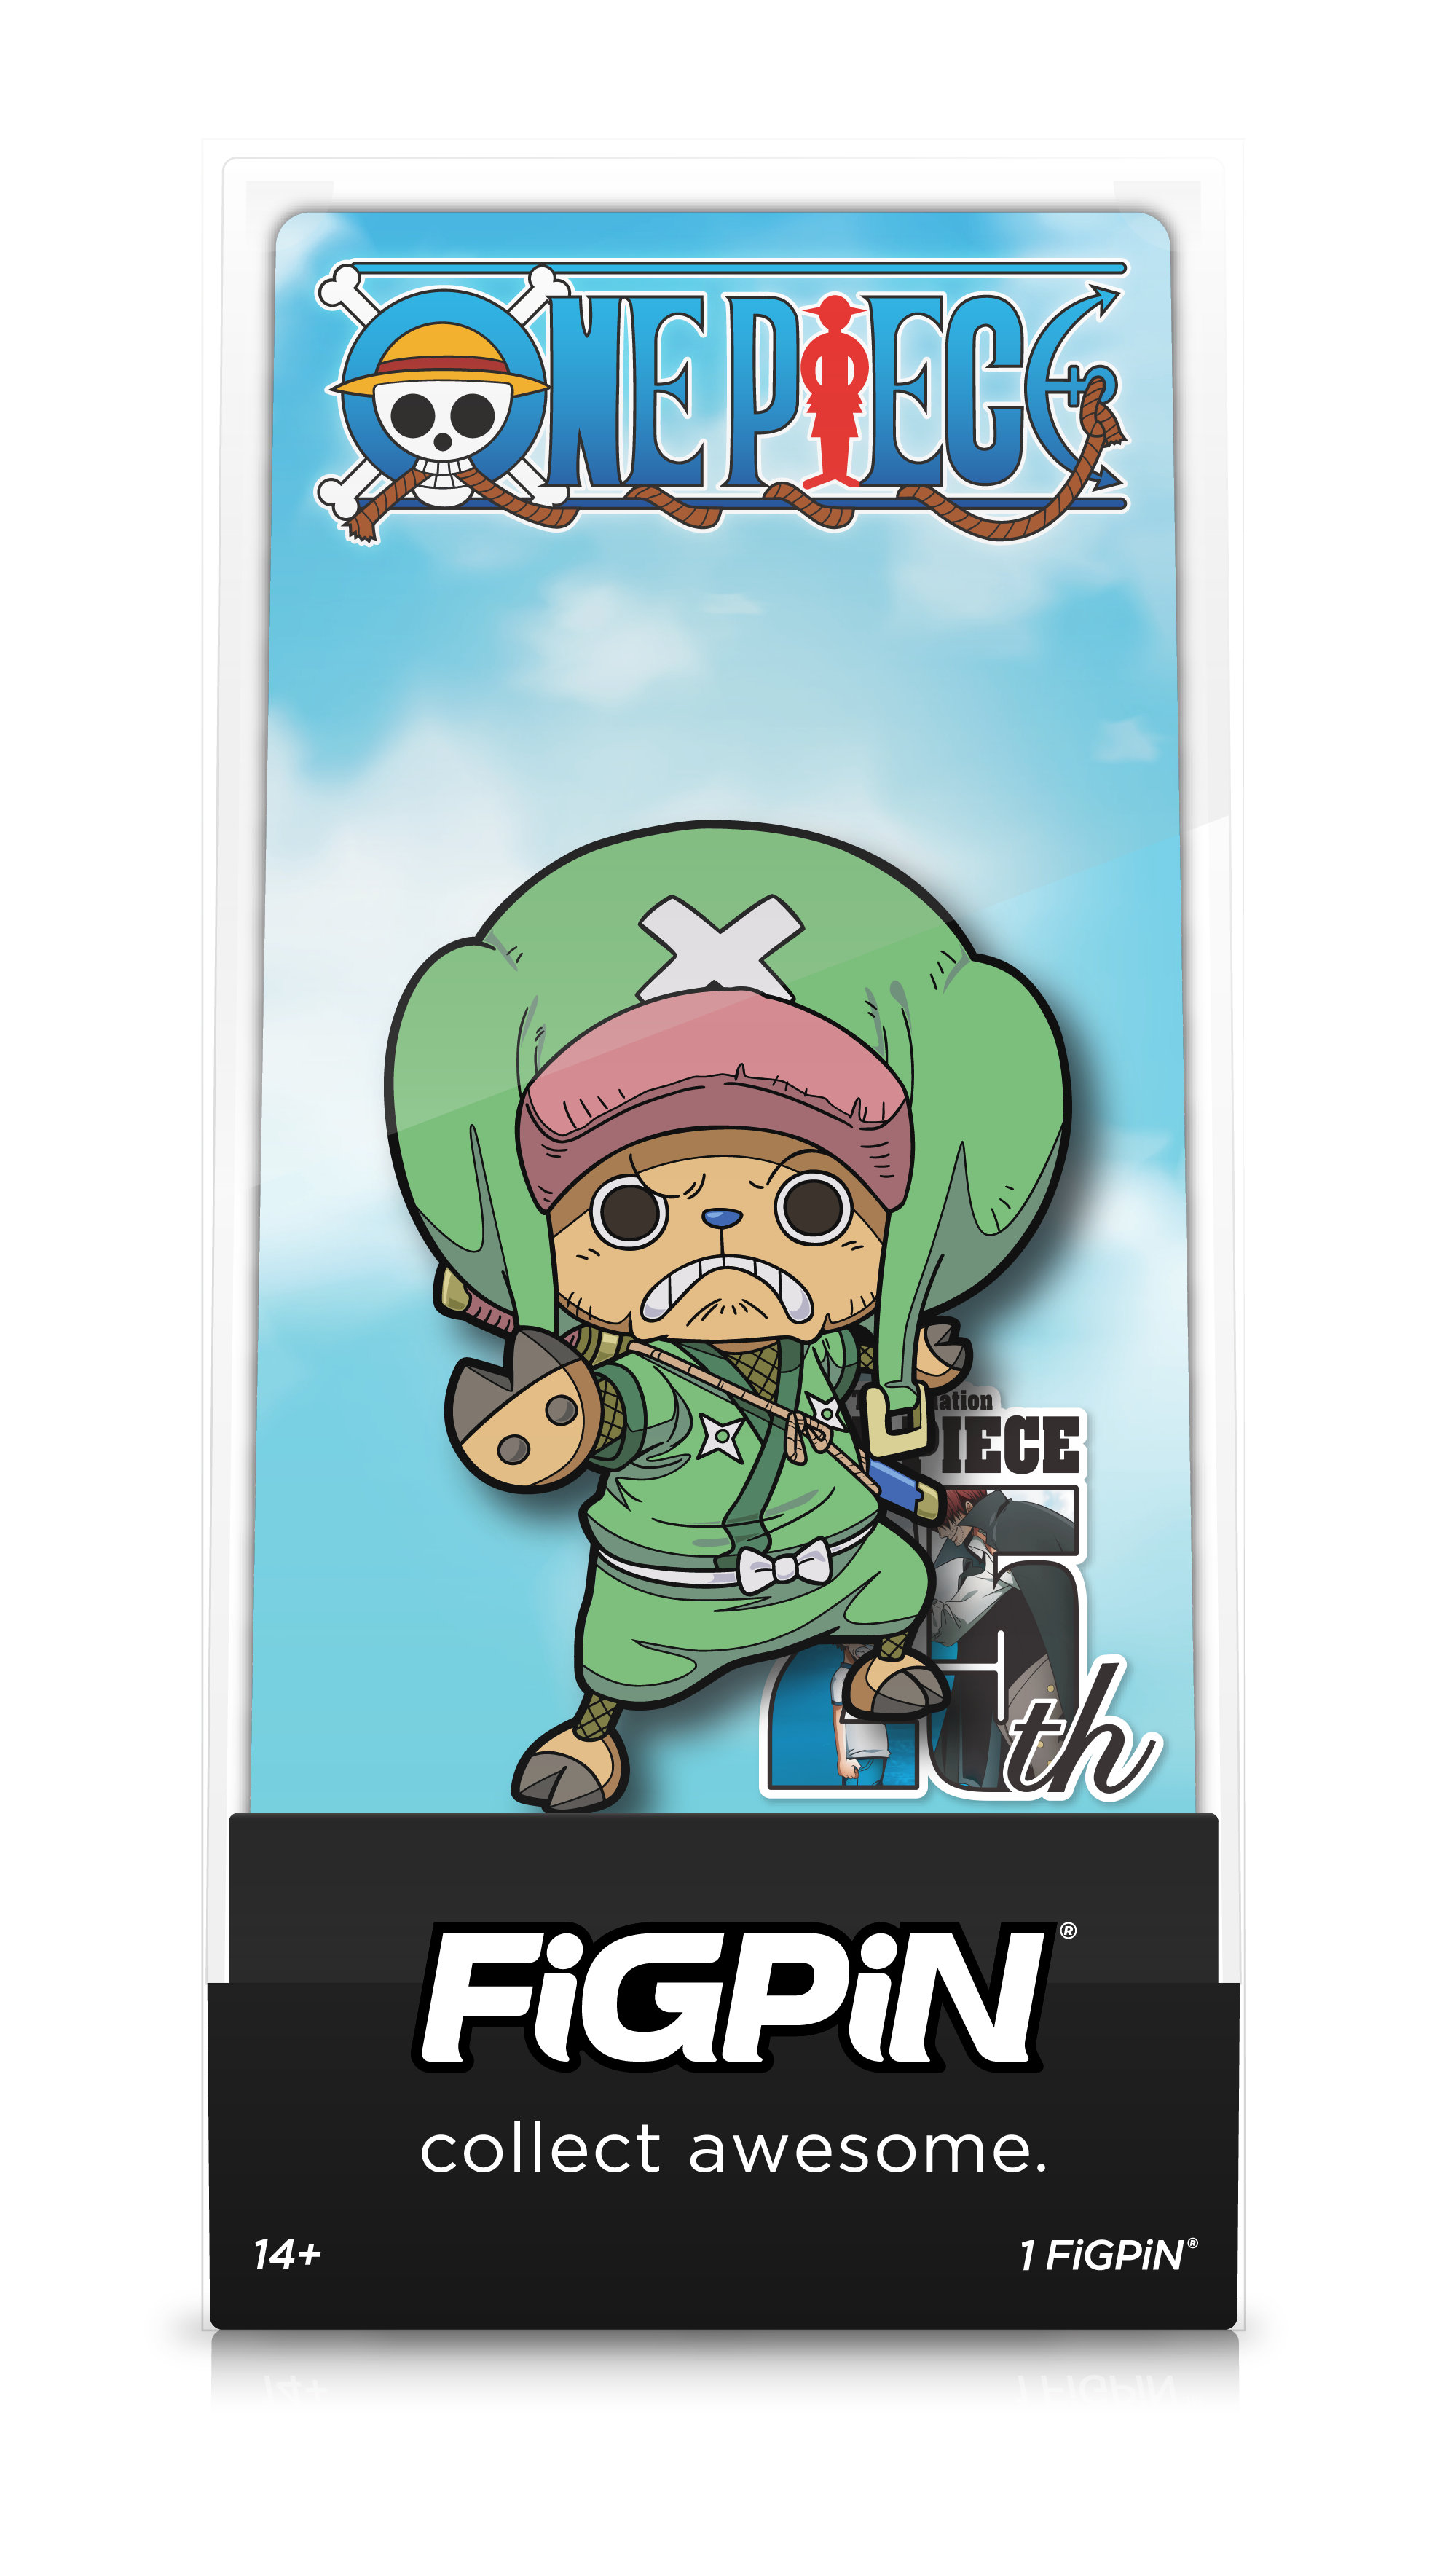 Front view of Chopperemon enamel pin inside FiGPiN Display case reading “FiGPiN - collect awesome”